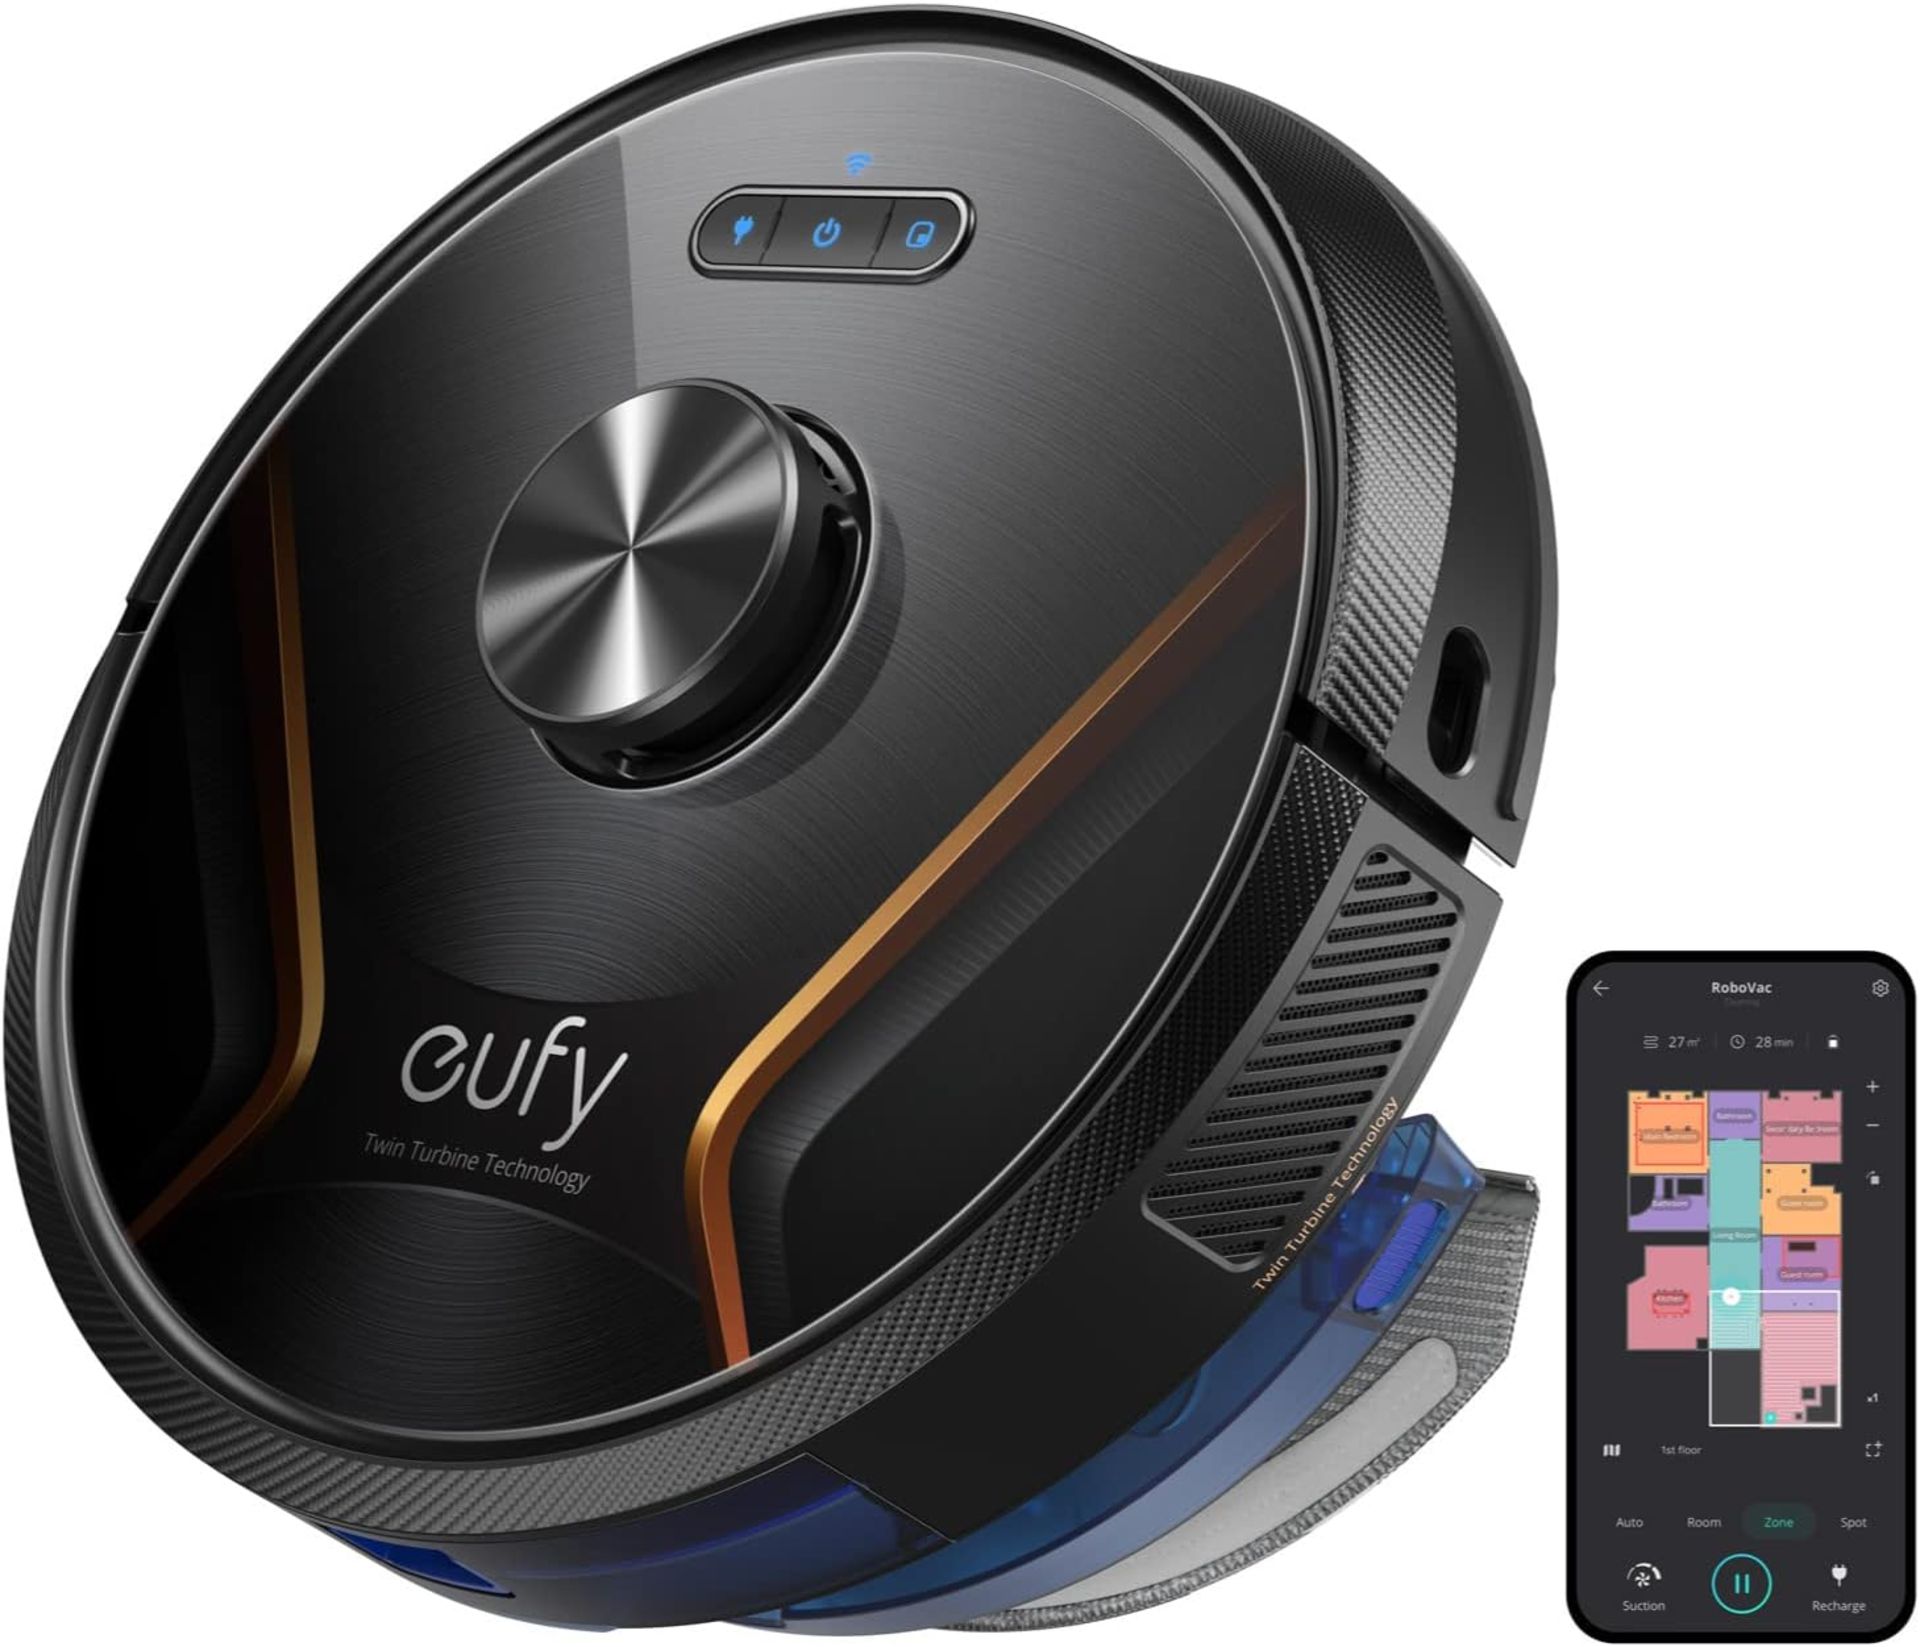 EUFY Robovac X8 Dual Twin-Tower Robot Vacuum Cleaner with iPath Laser Navigation. RRP £349.99.